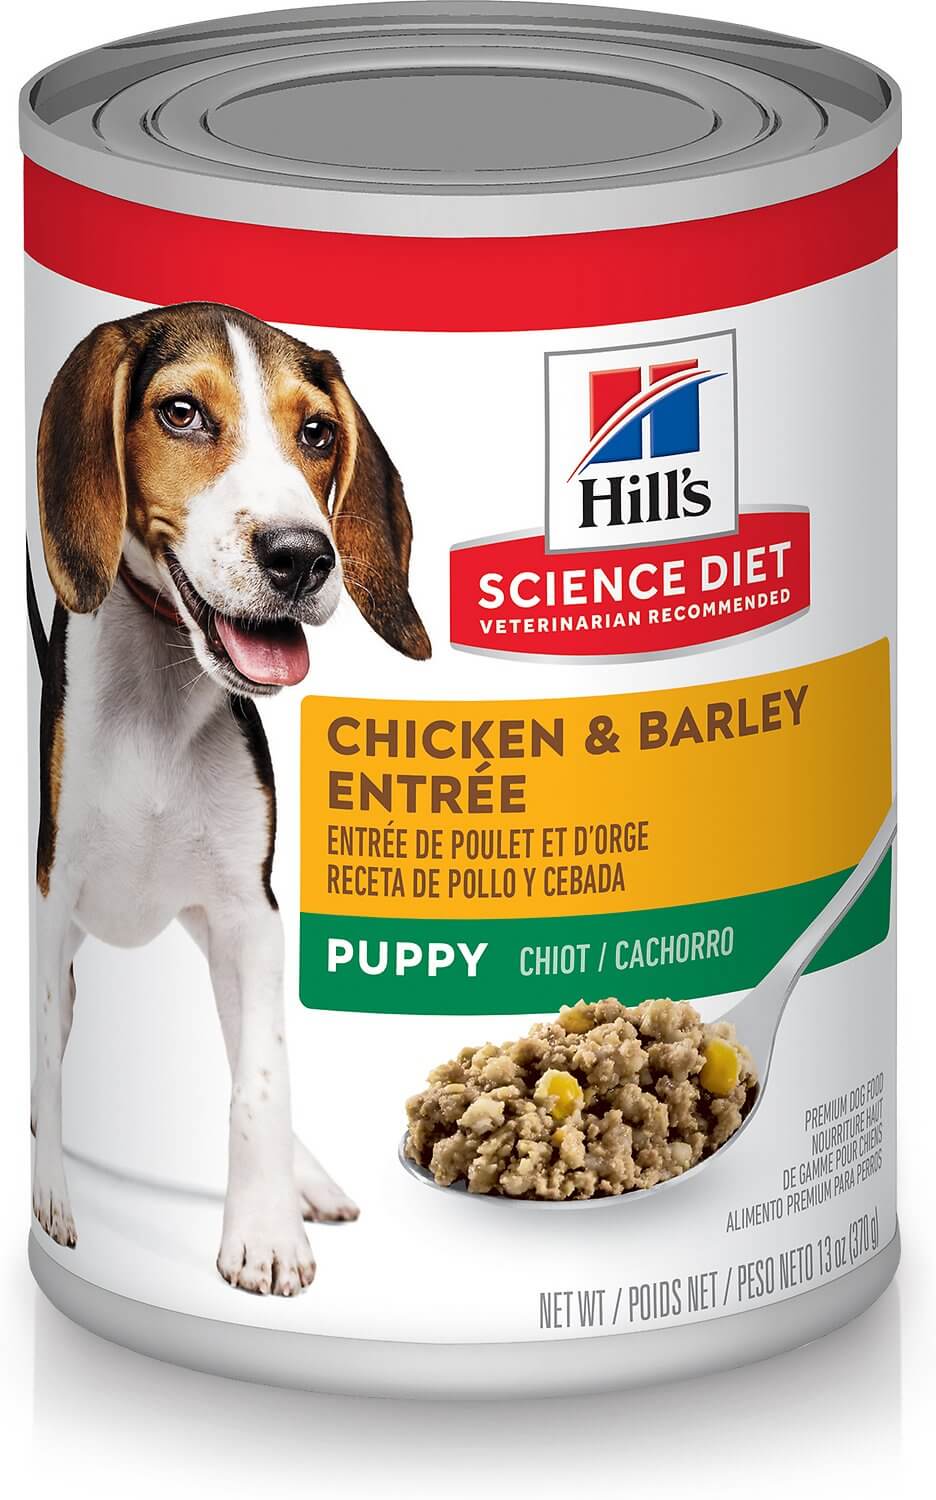 Hill’s Science Diet Puppy Food Review (Canned)